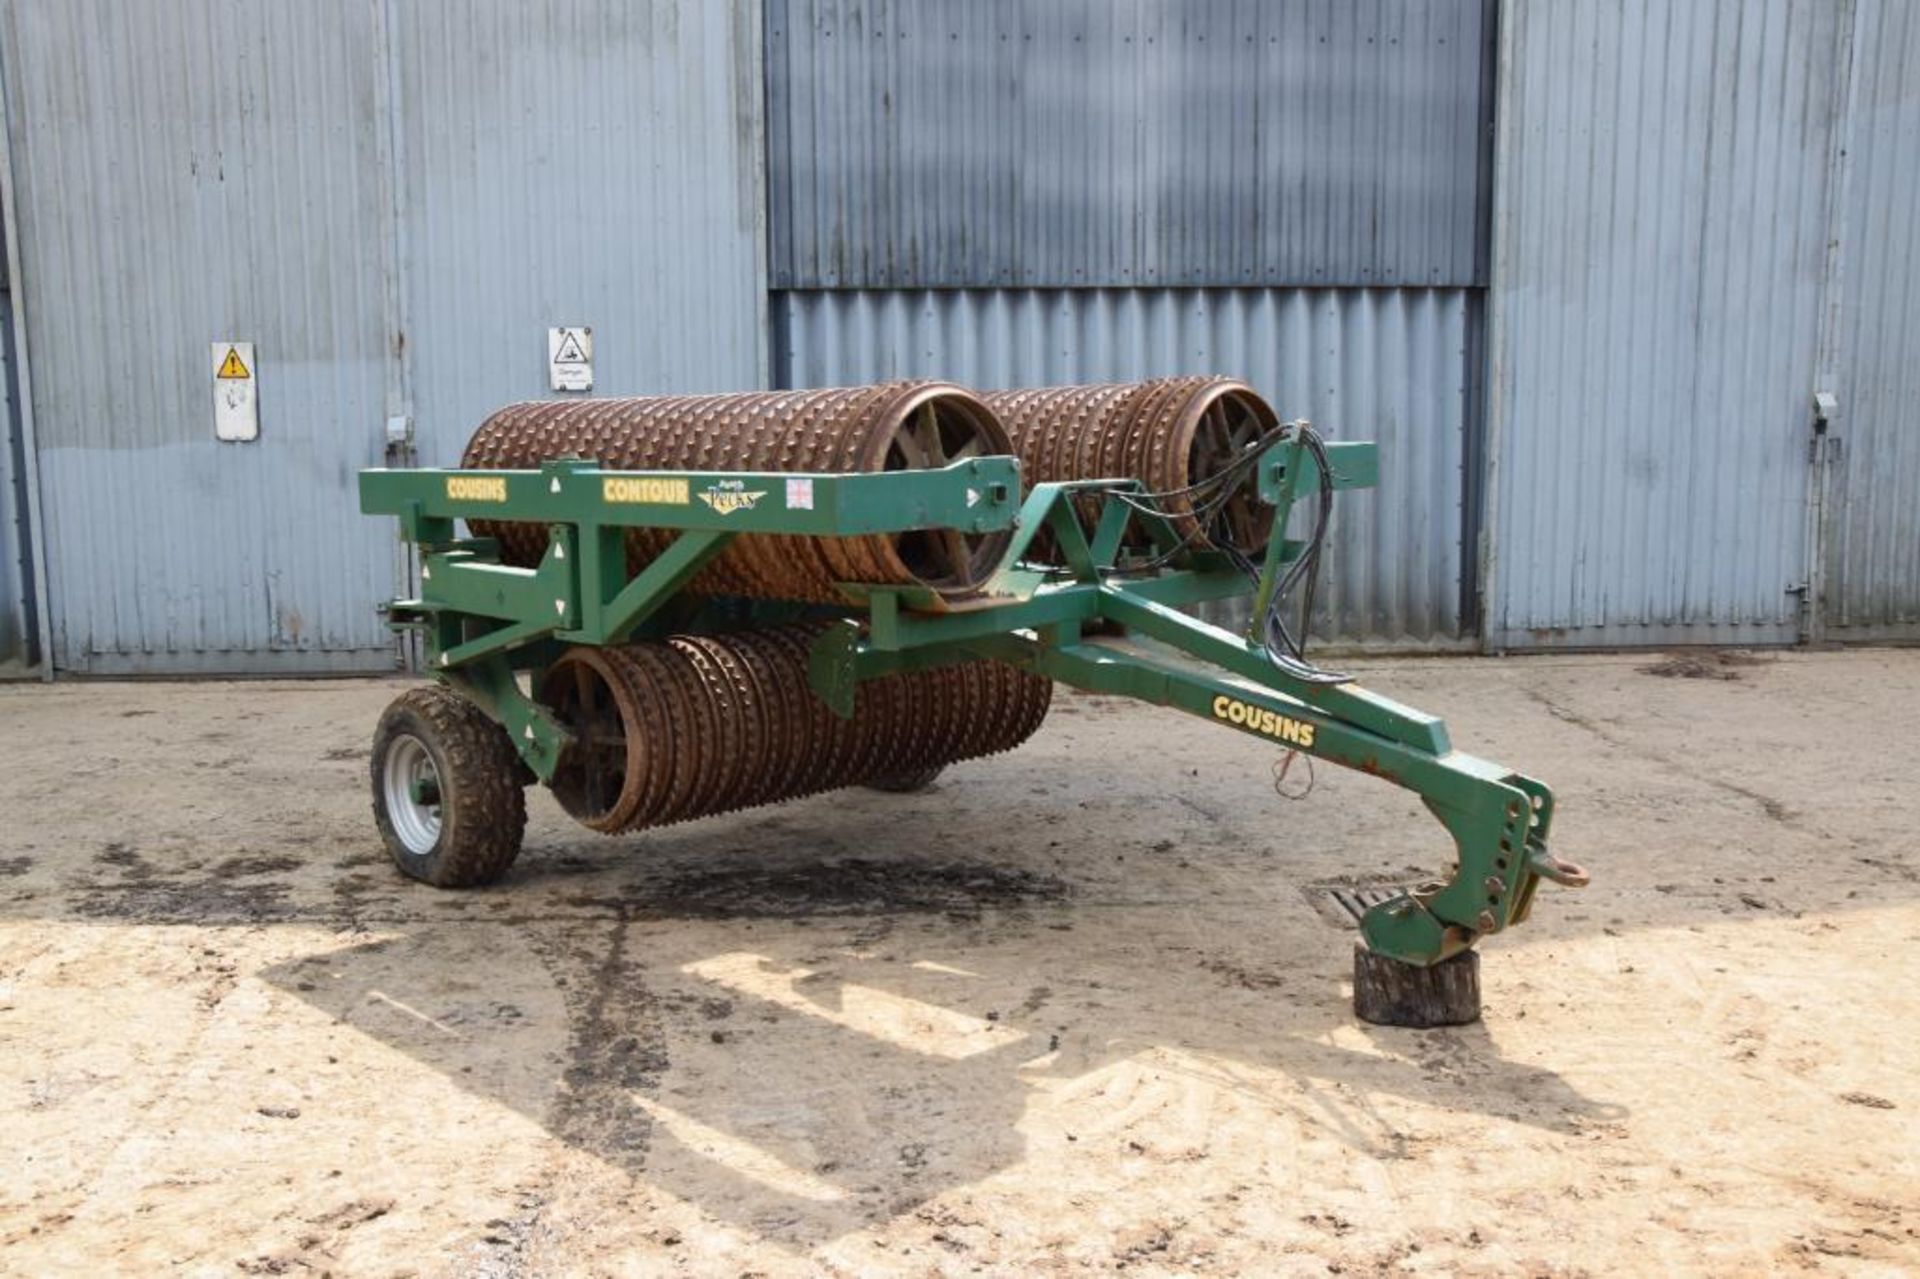 2010 Cousins Contour 6.3m horizontal folding cambridge rolls with breaker rings. Serial No: 2010066 - Image 4 of 16